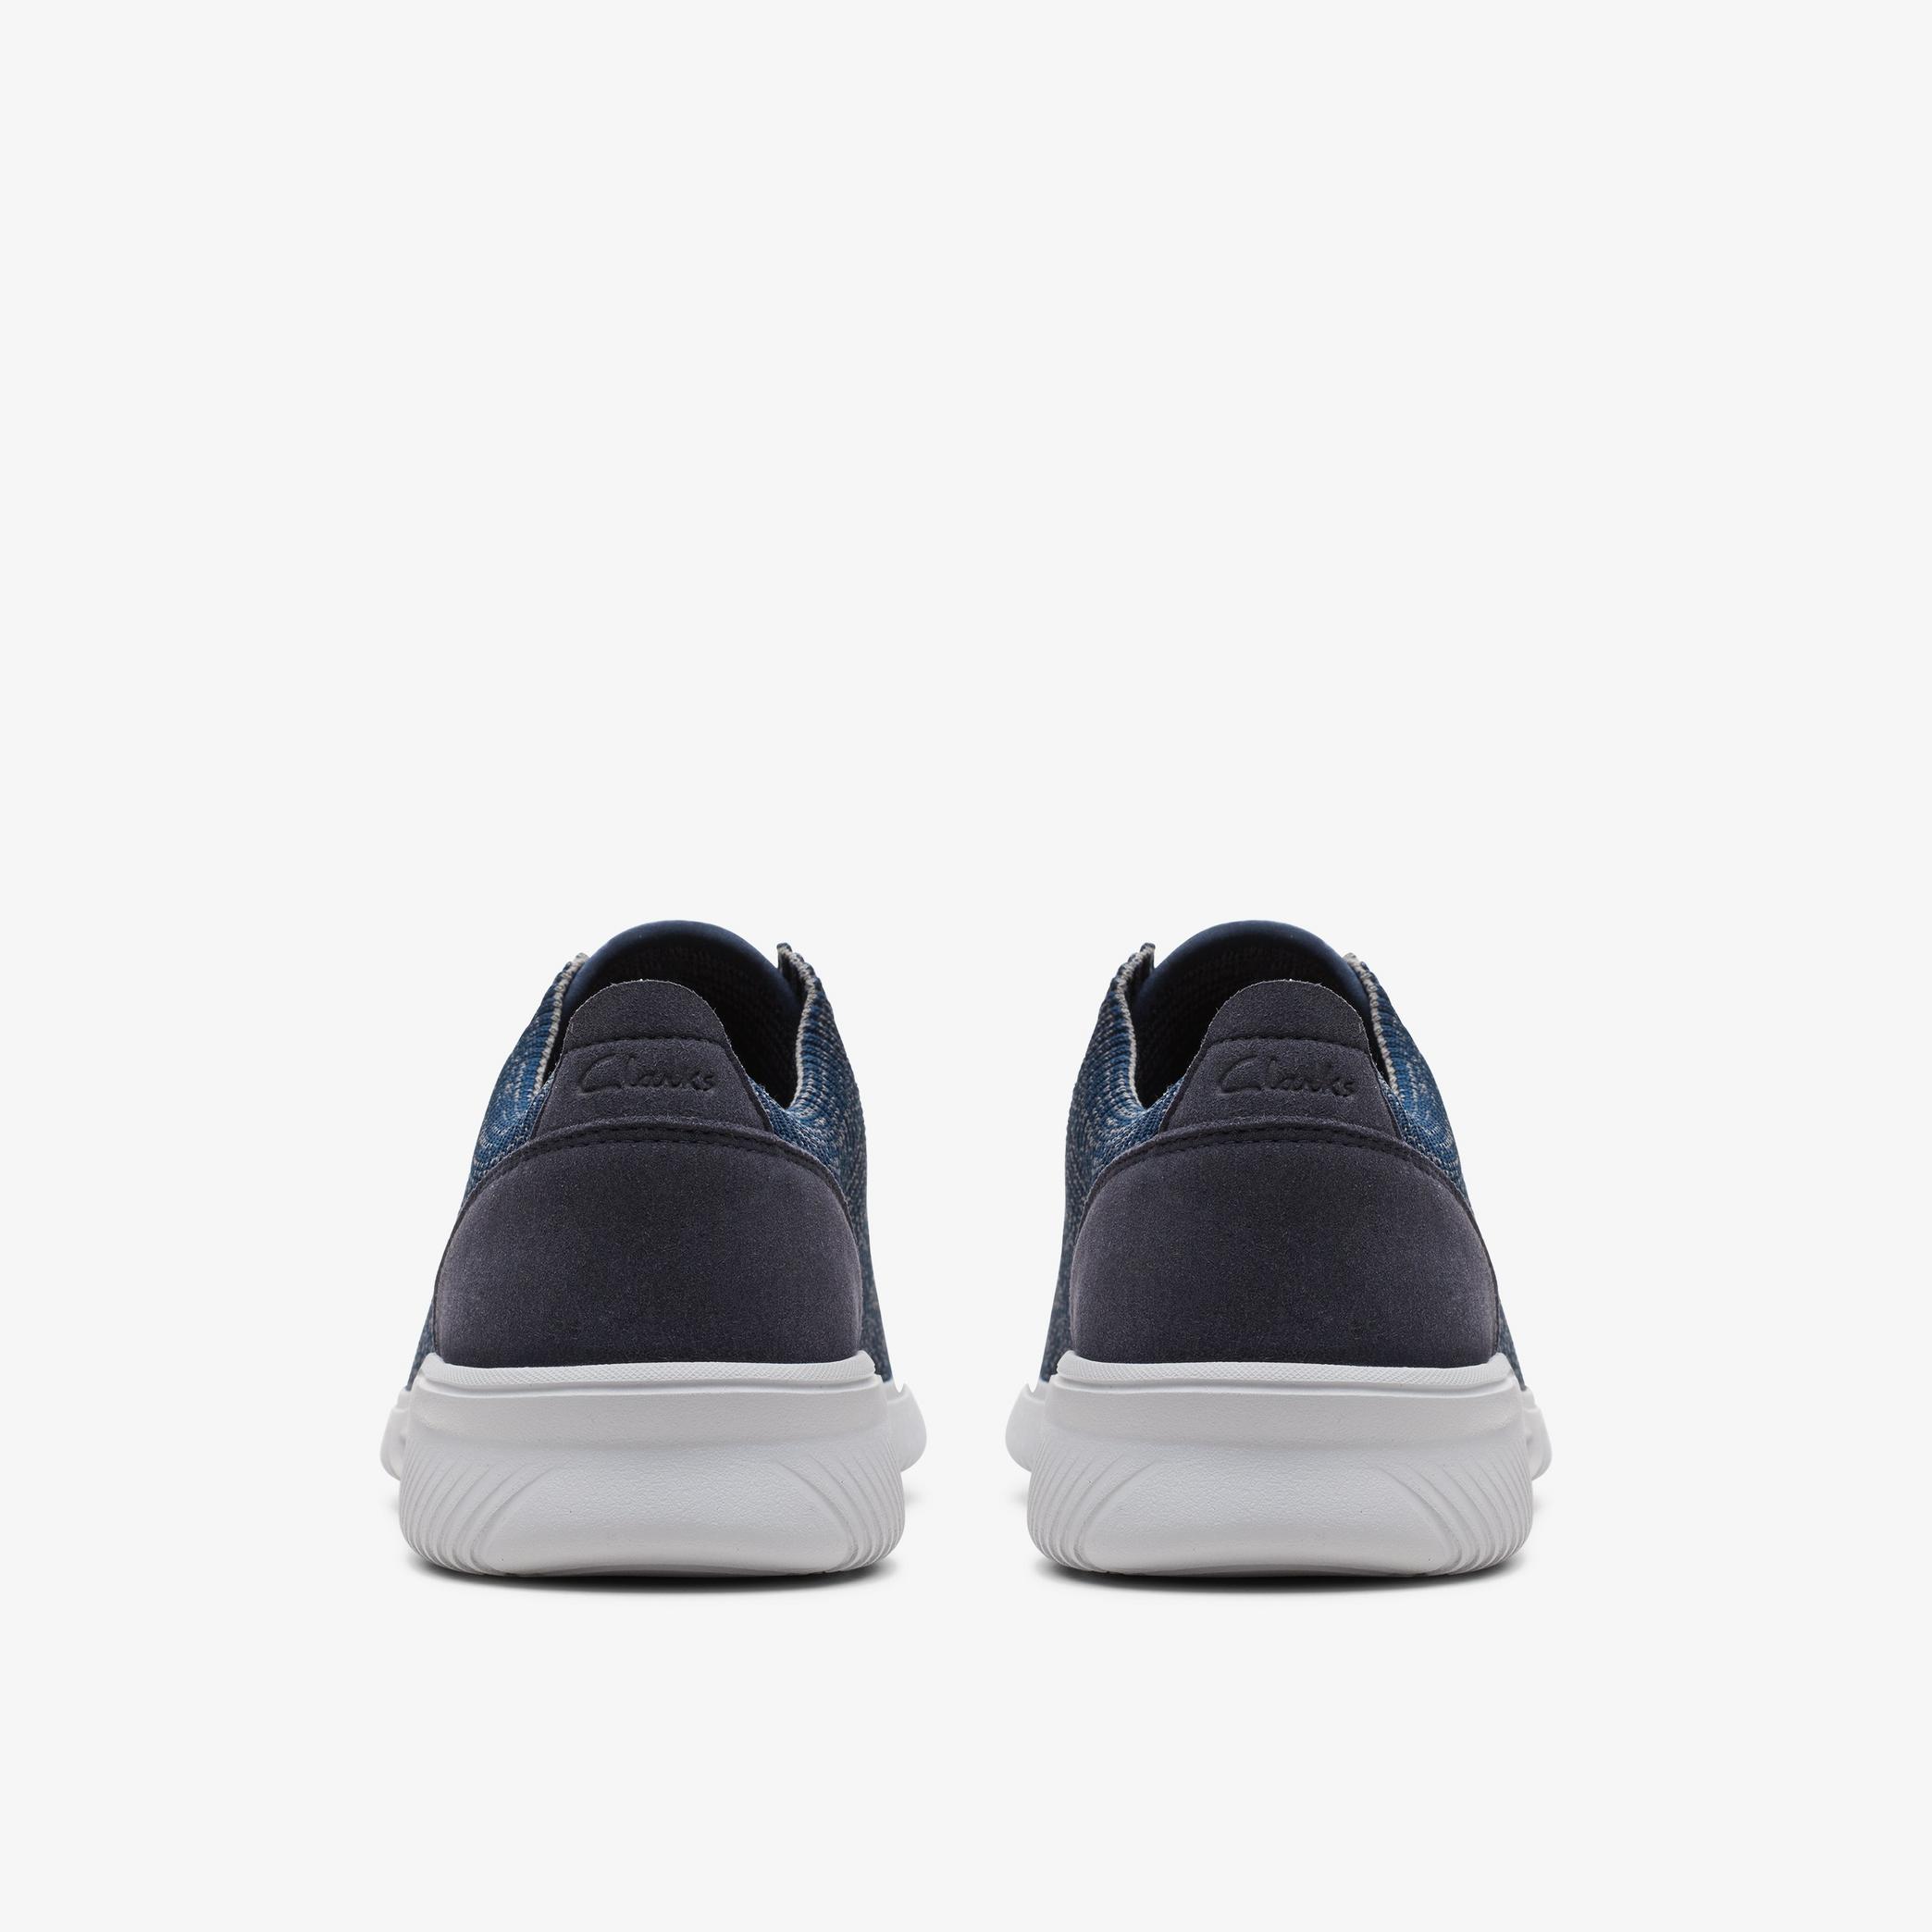 Donaway Knit Navy Knit Trainers, view 5 of 6